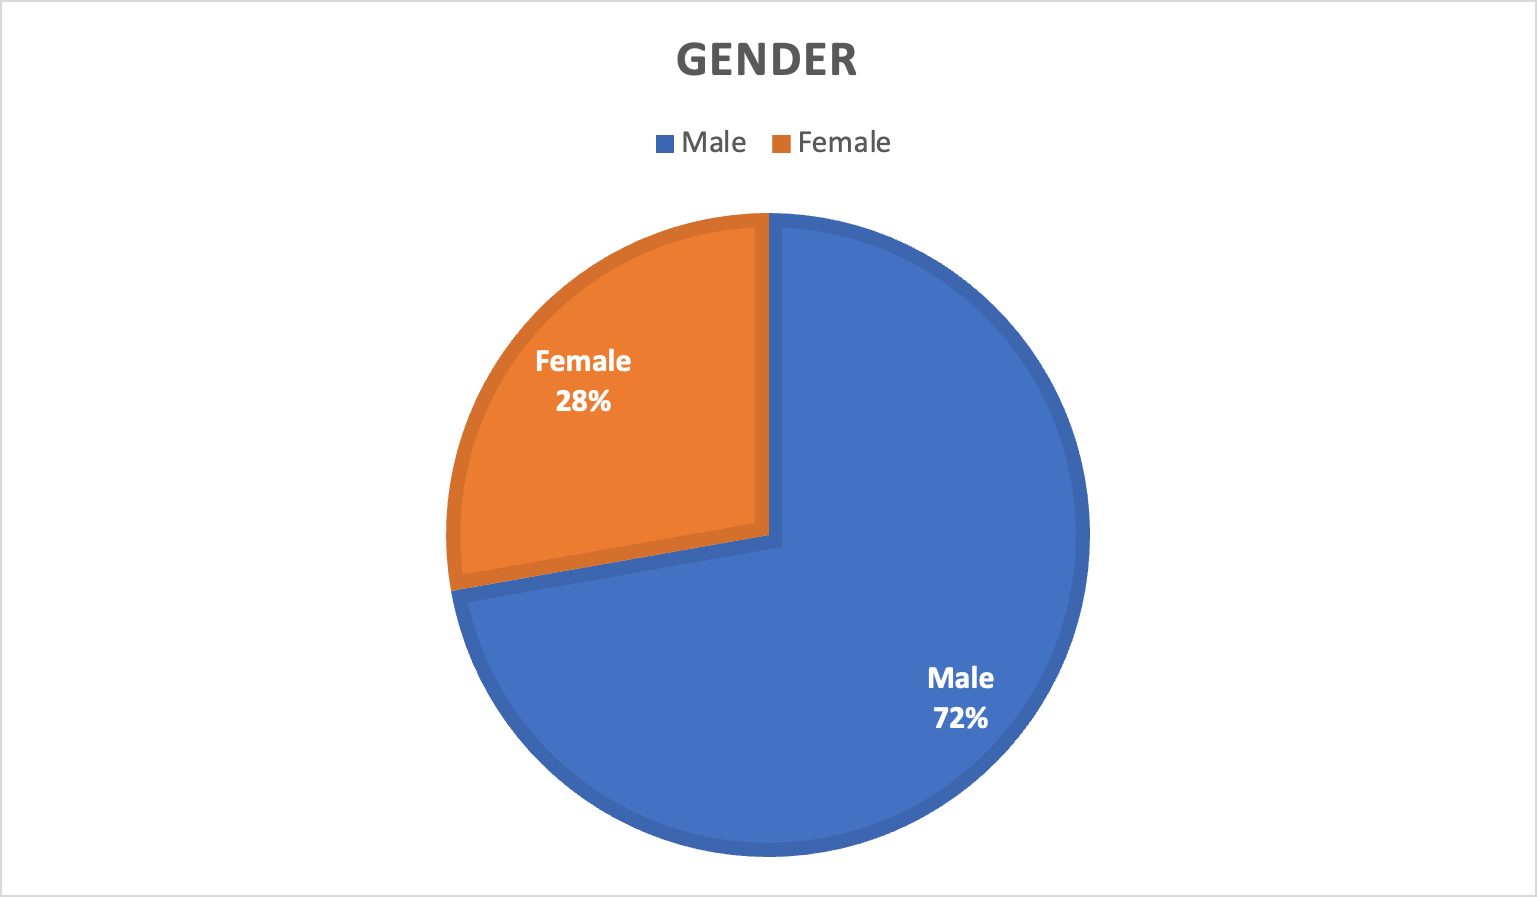 Gender pie chart showing 28% female in orange, and 72% male in blue.